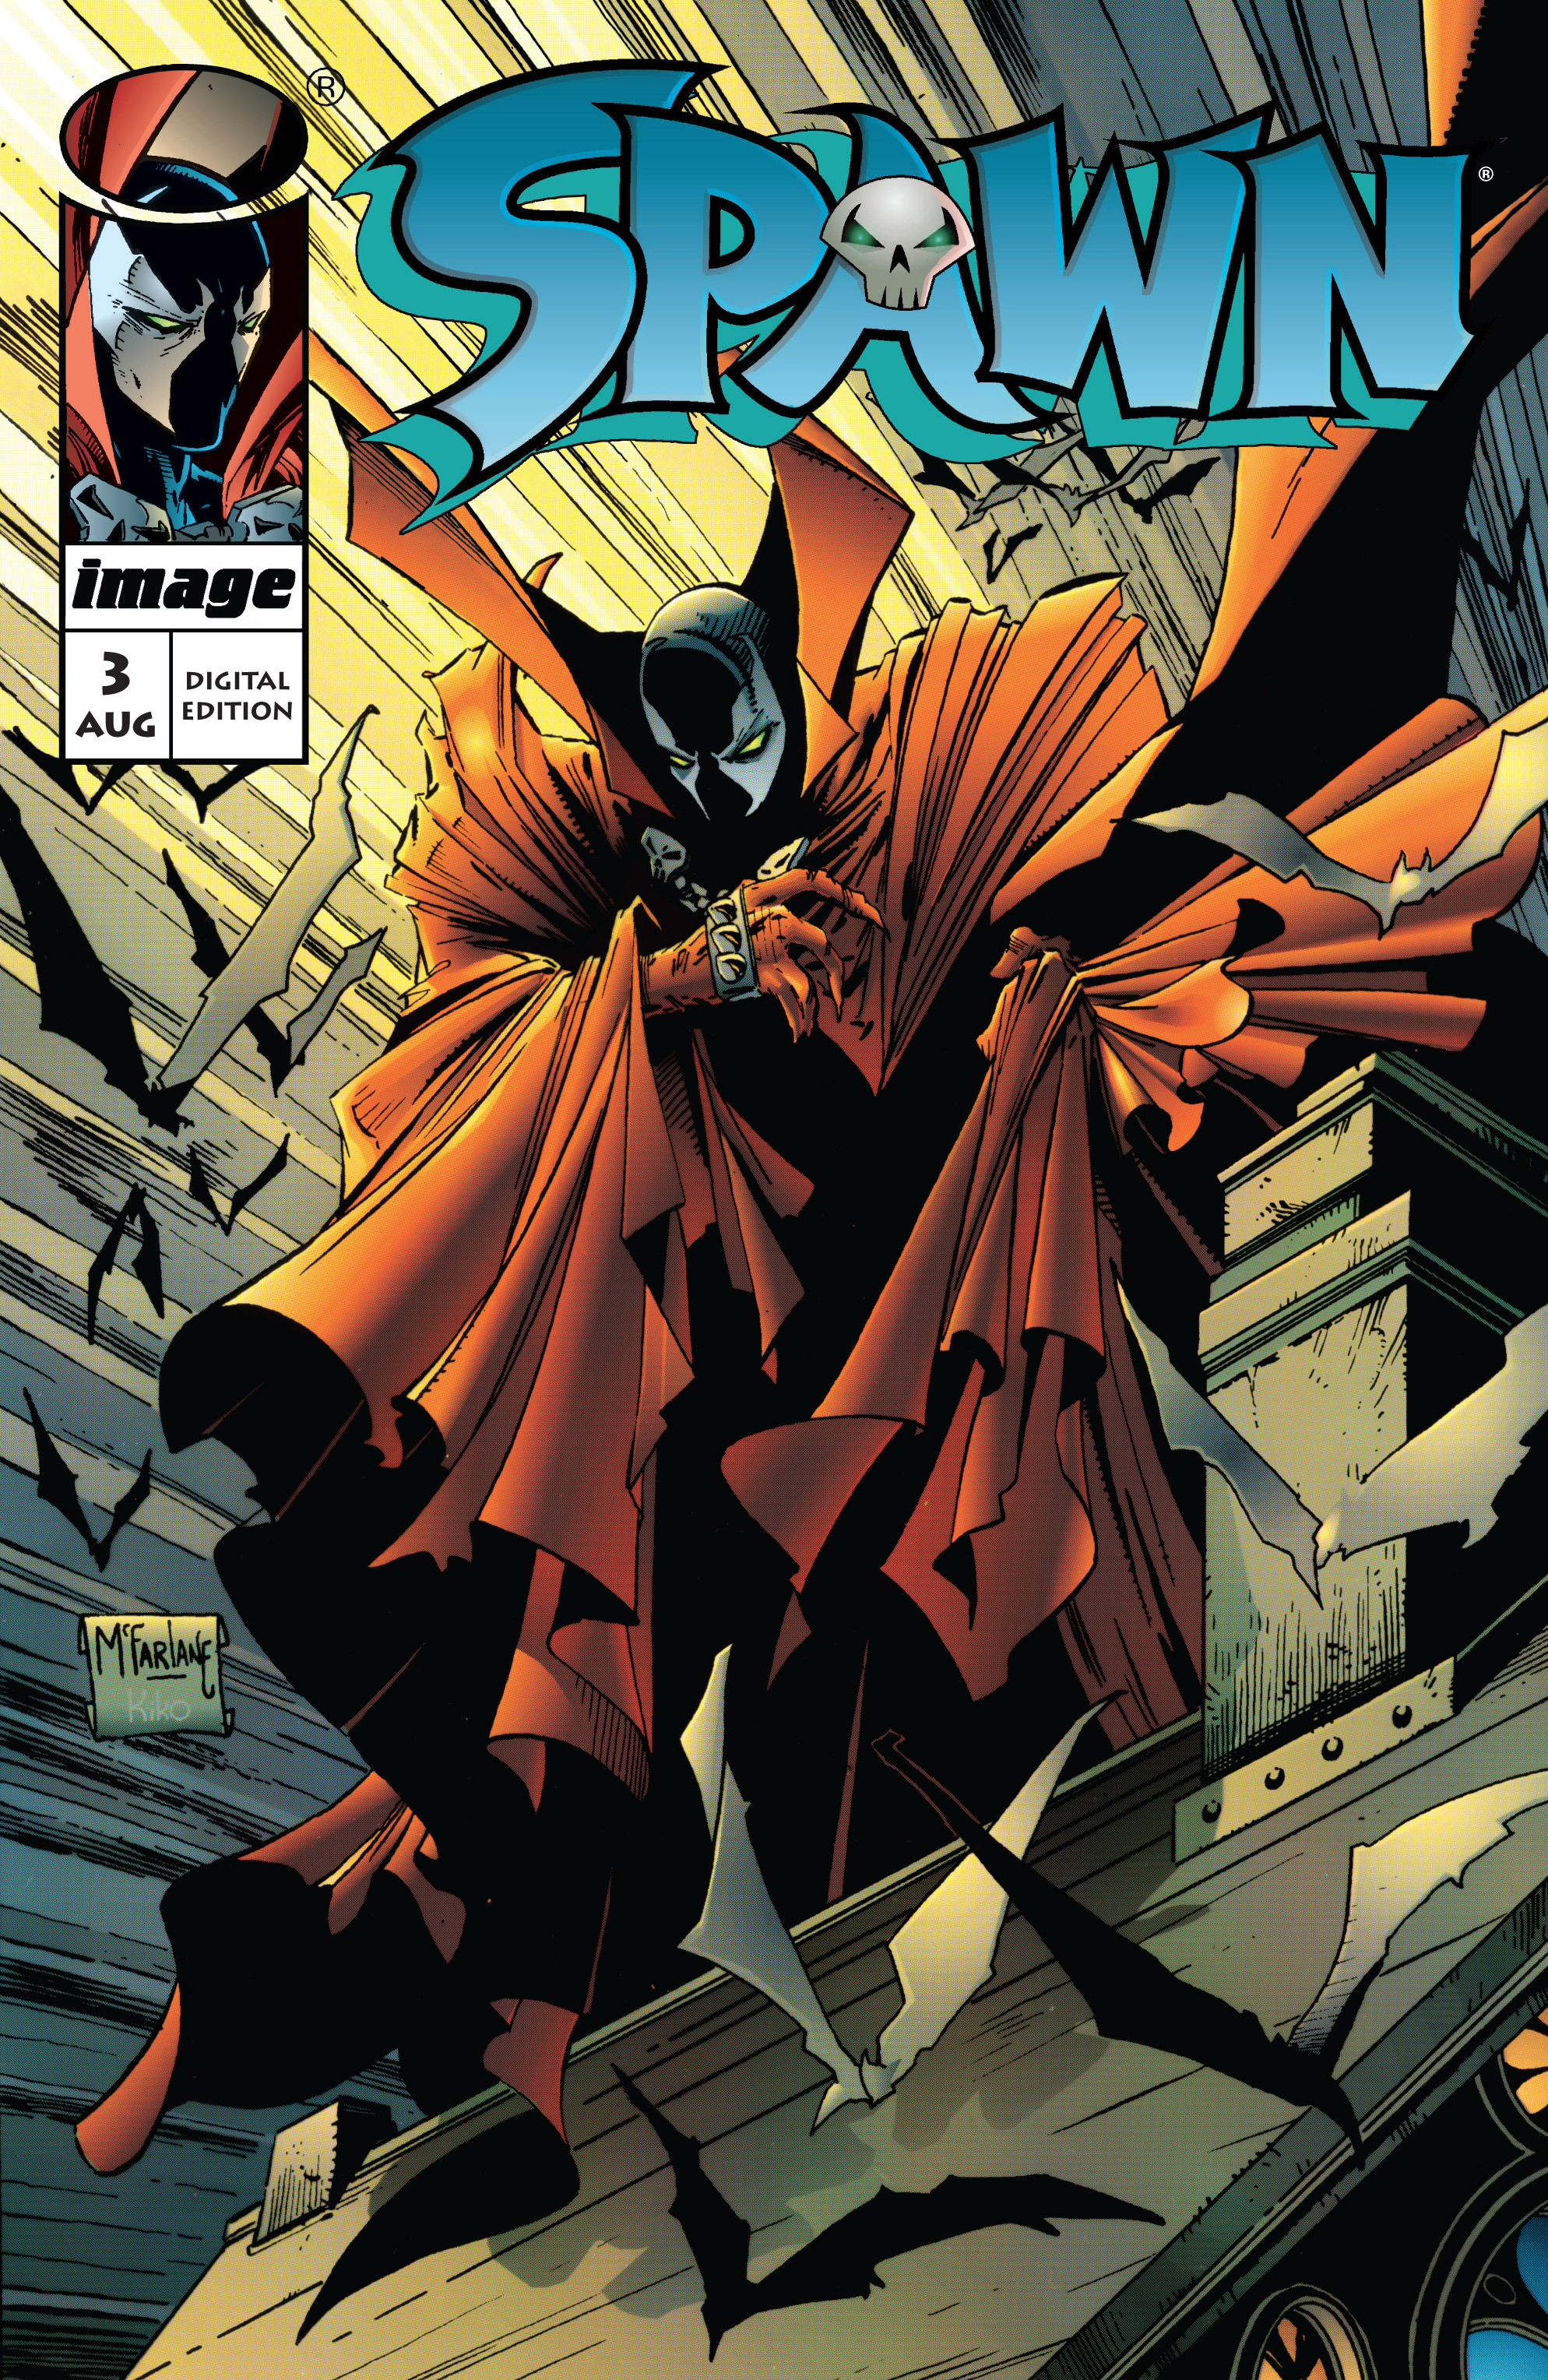 Read online Spawn comic -  Issue #3 - 1